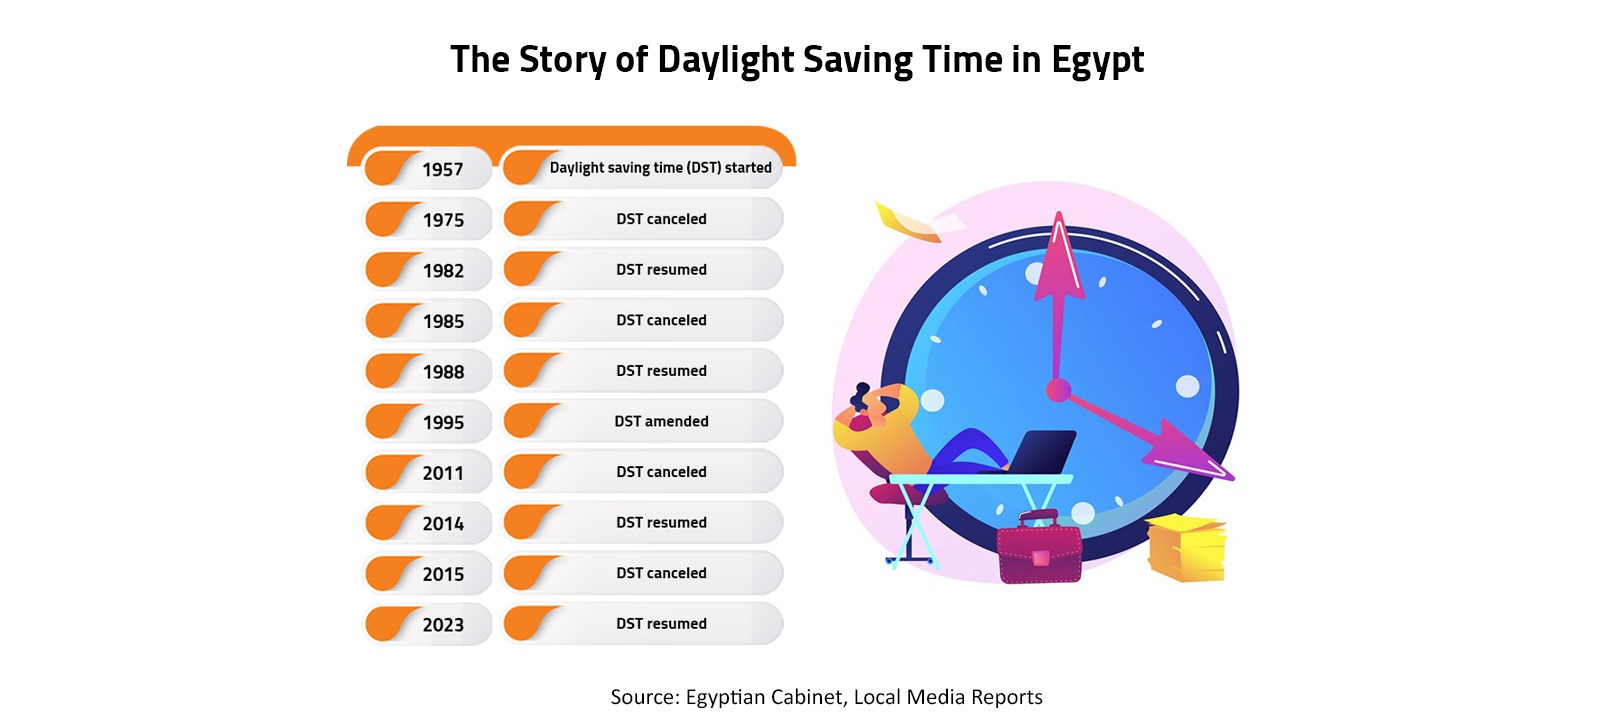 The Story of Daylight Saving Time in Egypt